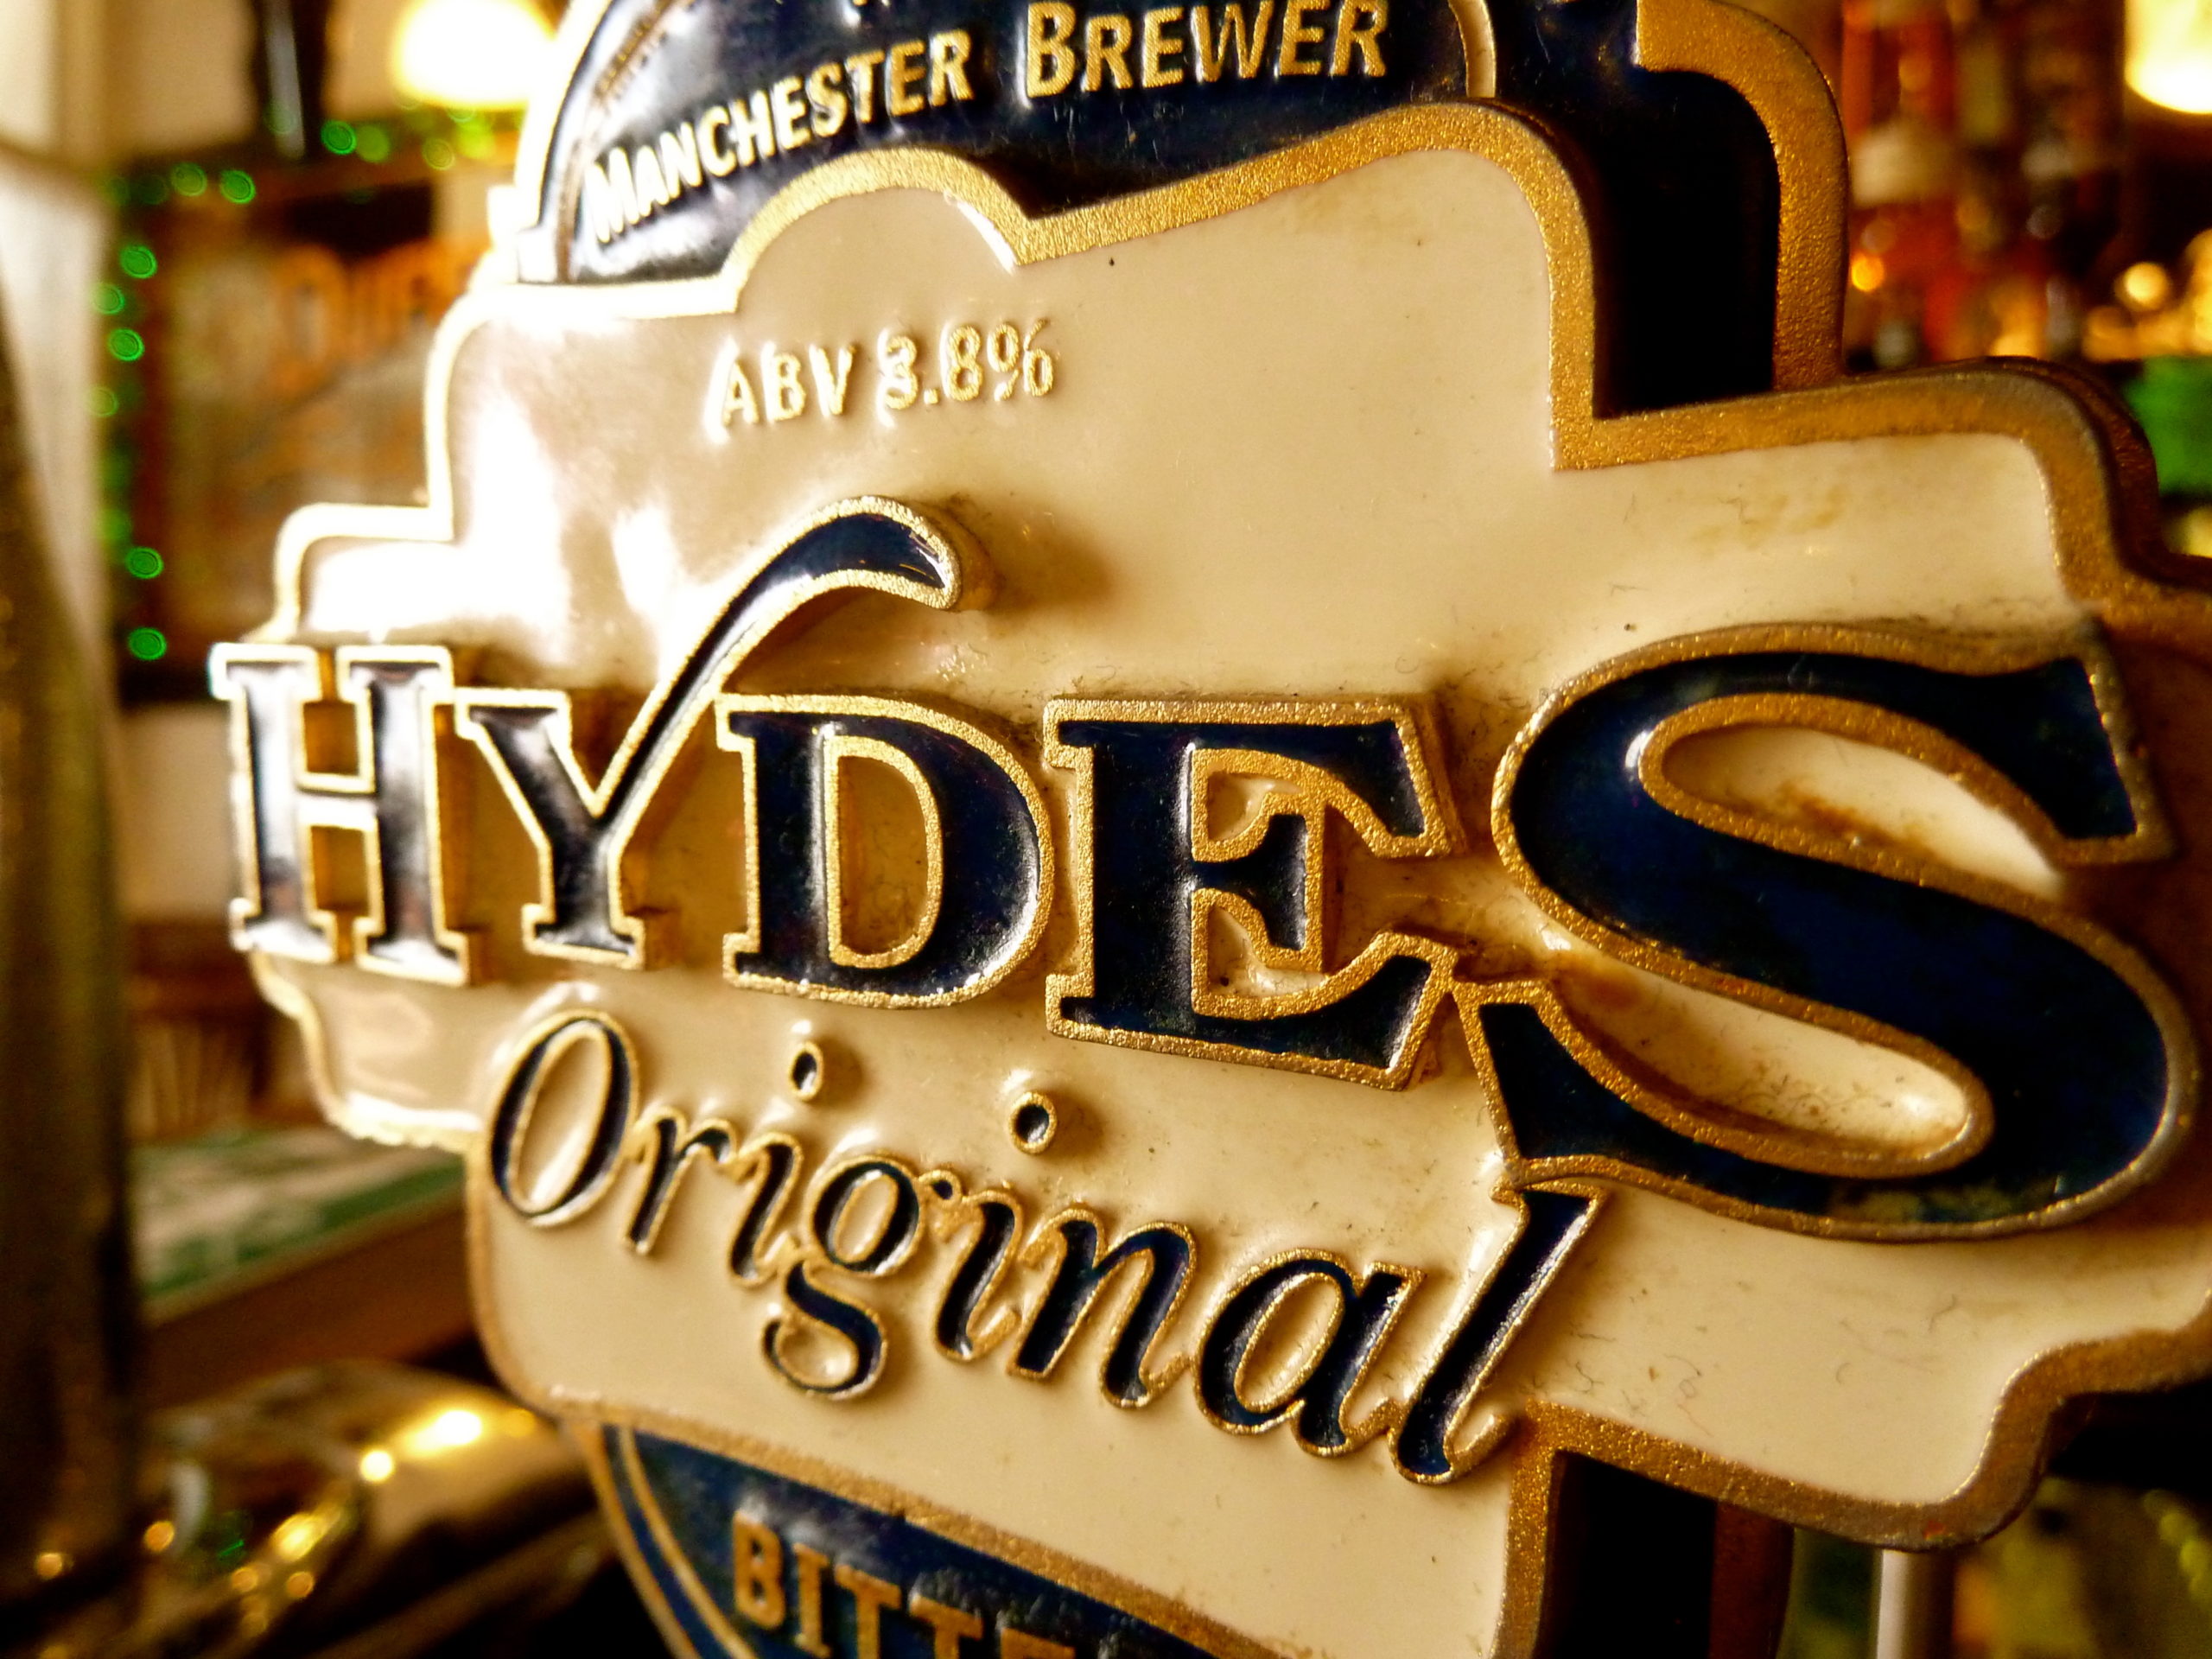 Hyde's Original Bitter...a staple lunchtime beer in Manchester